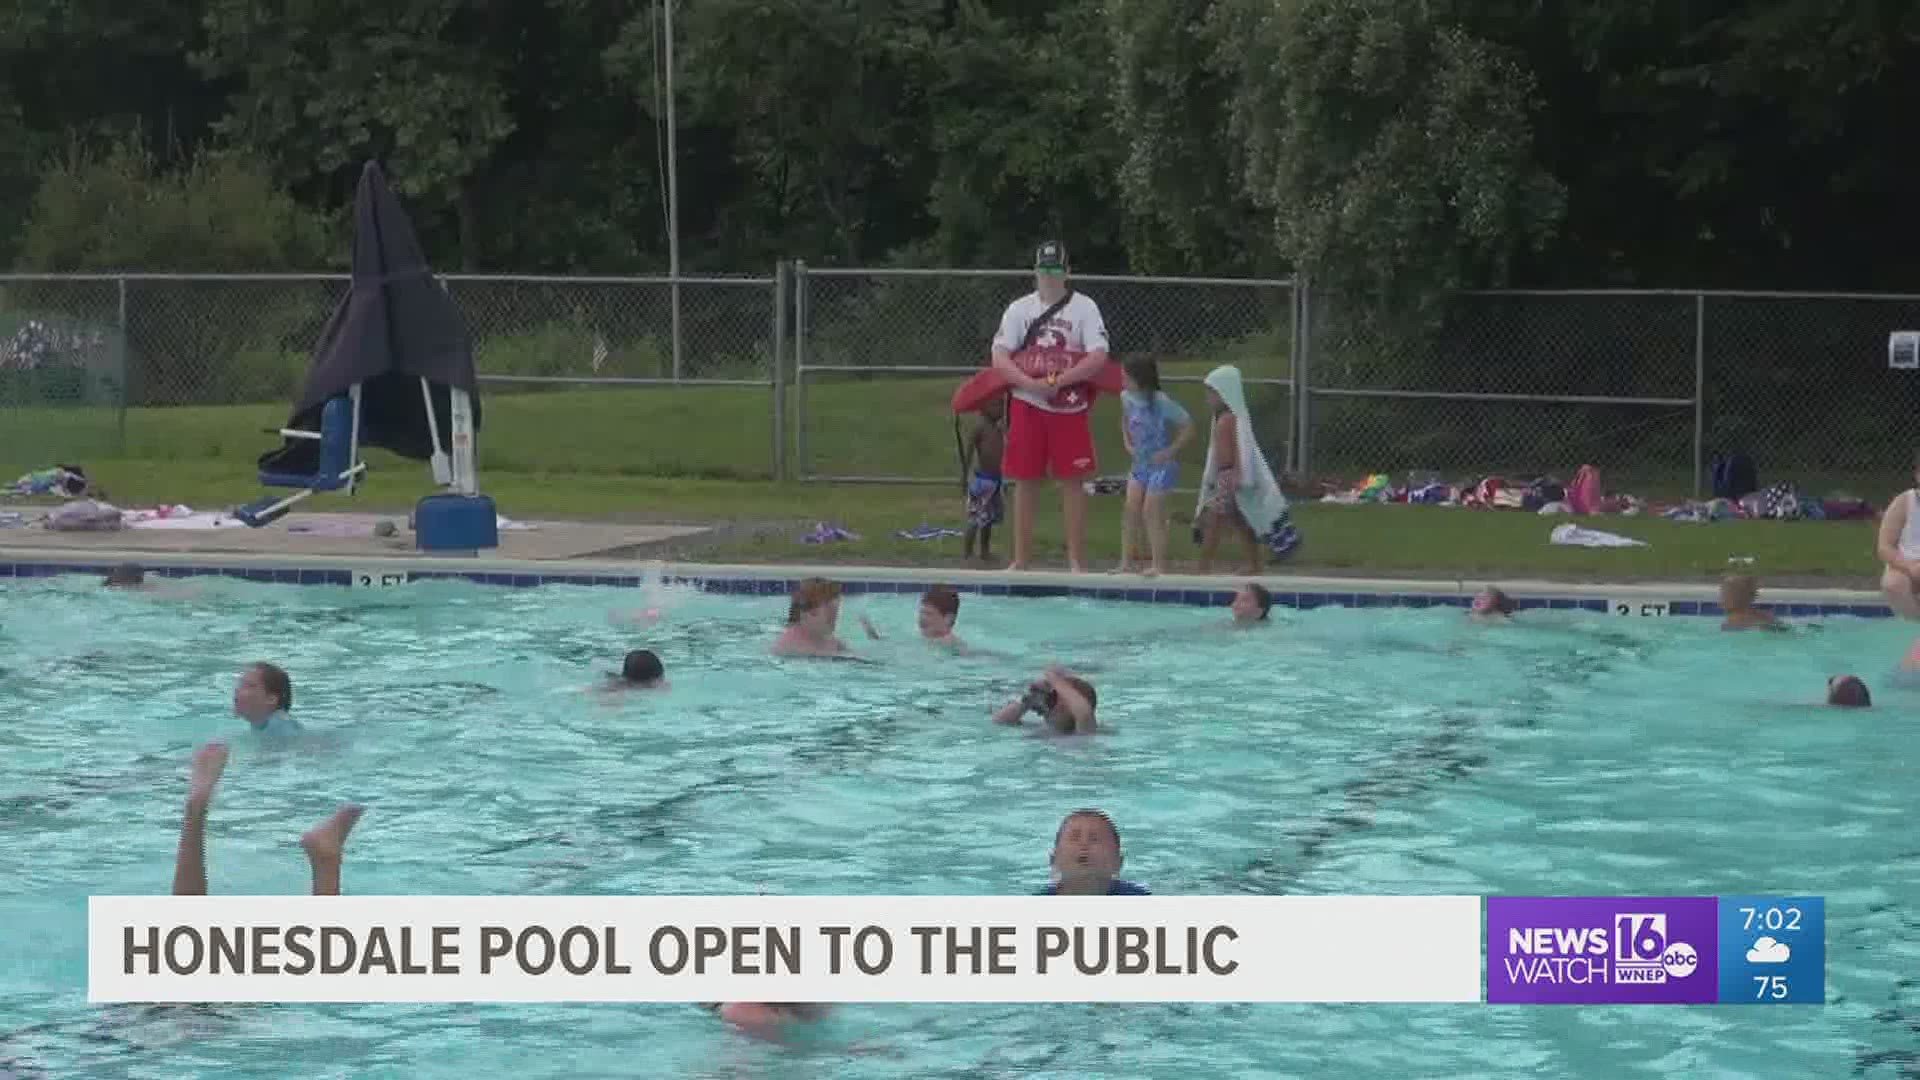 After lifeguard staffing issues, the borough's pool is finally open to the public and swimmers were taking advantage of the summer day.